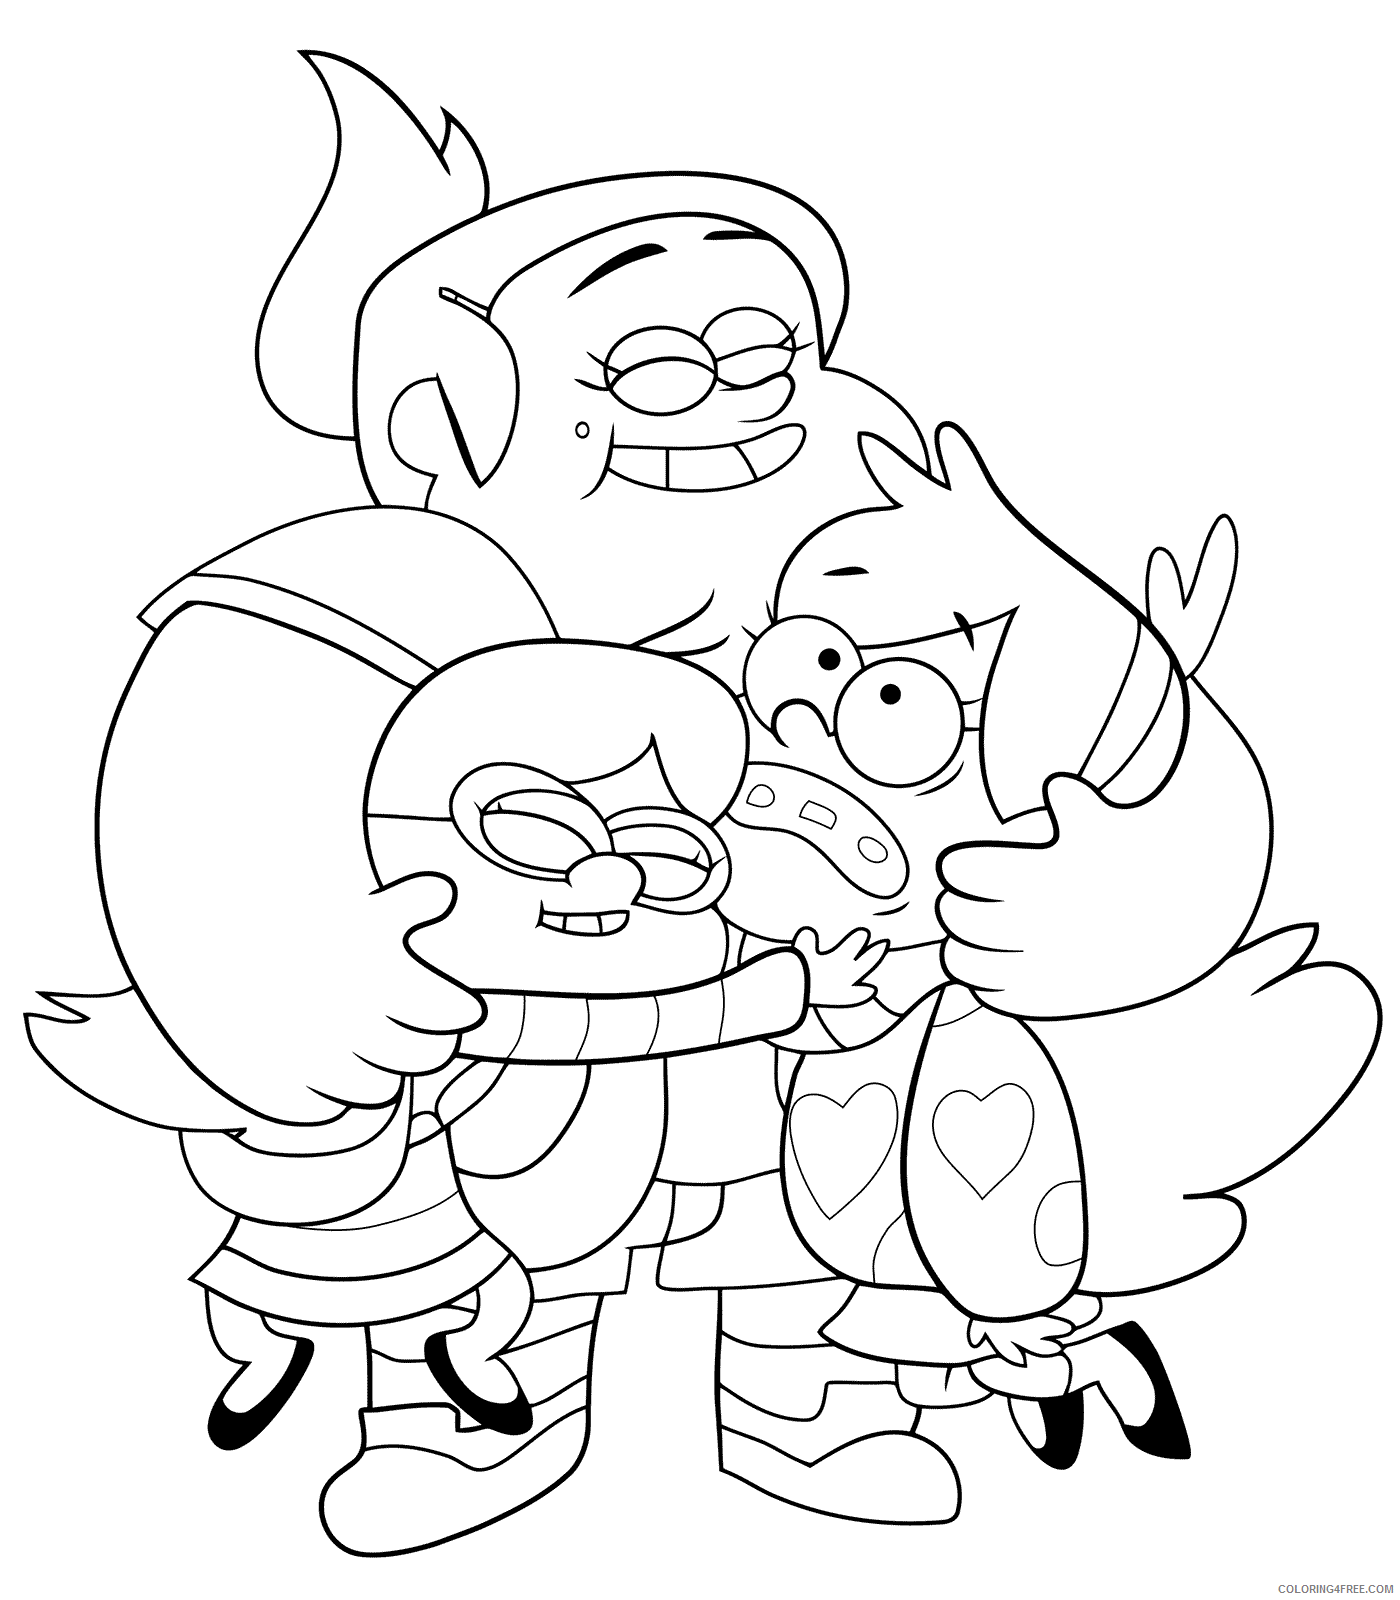 Gravity Falls Coloring Pages TV Film Characters Printable 2020 03351 Coloring4free